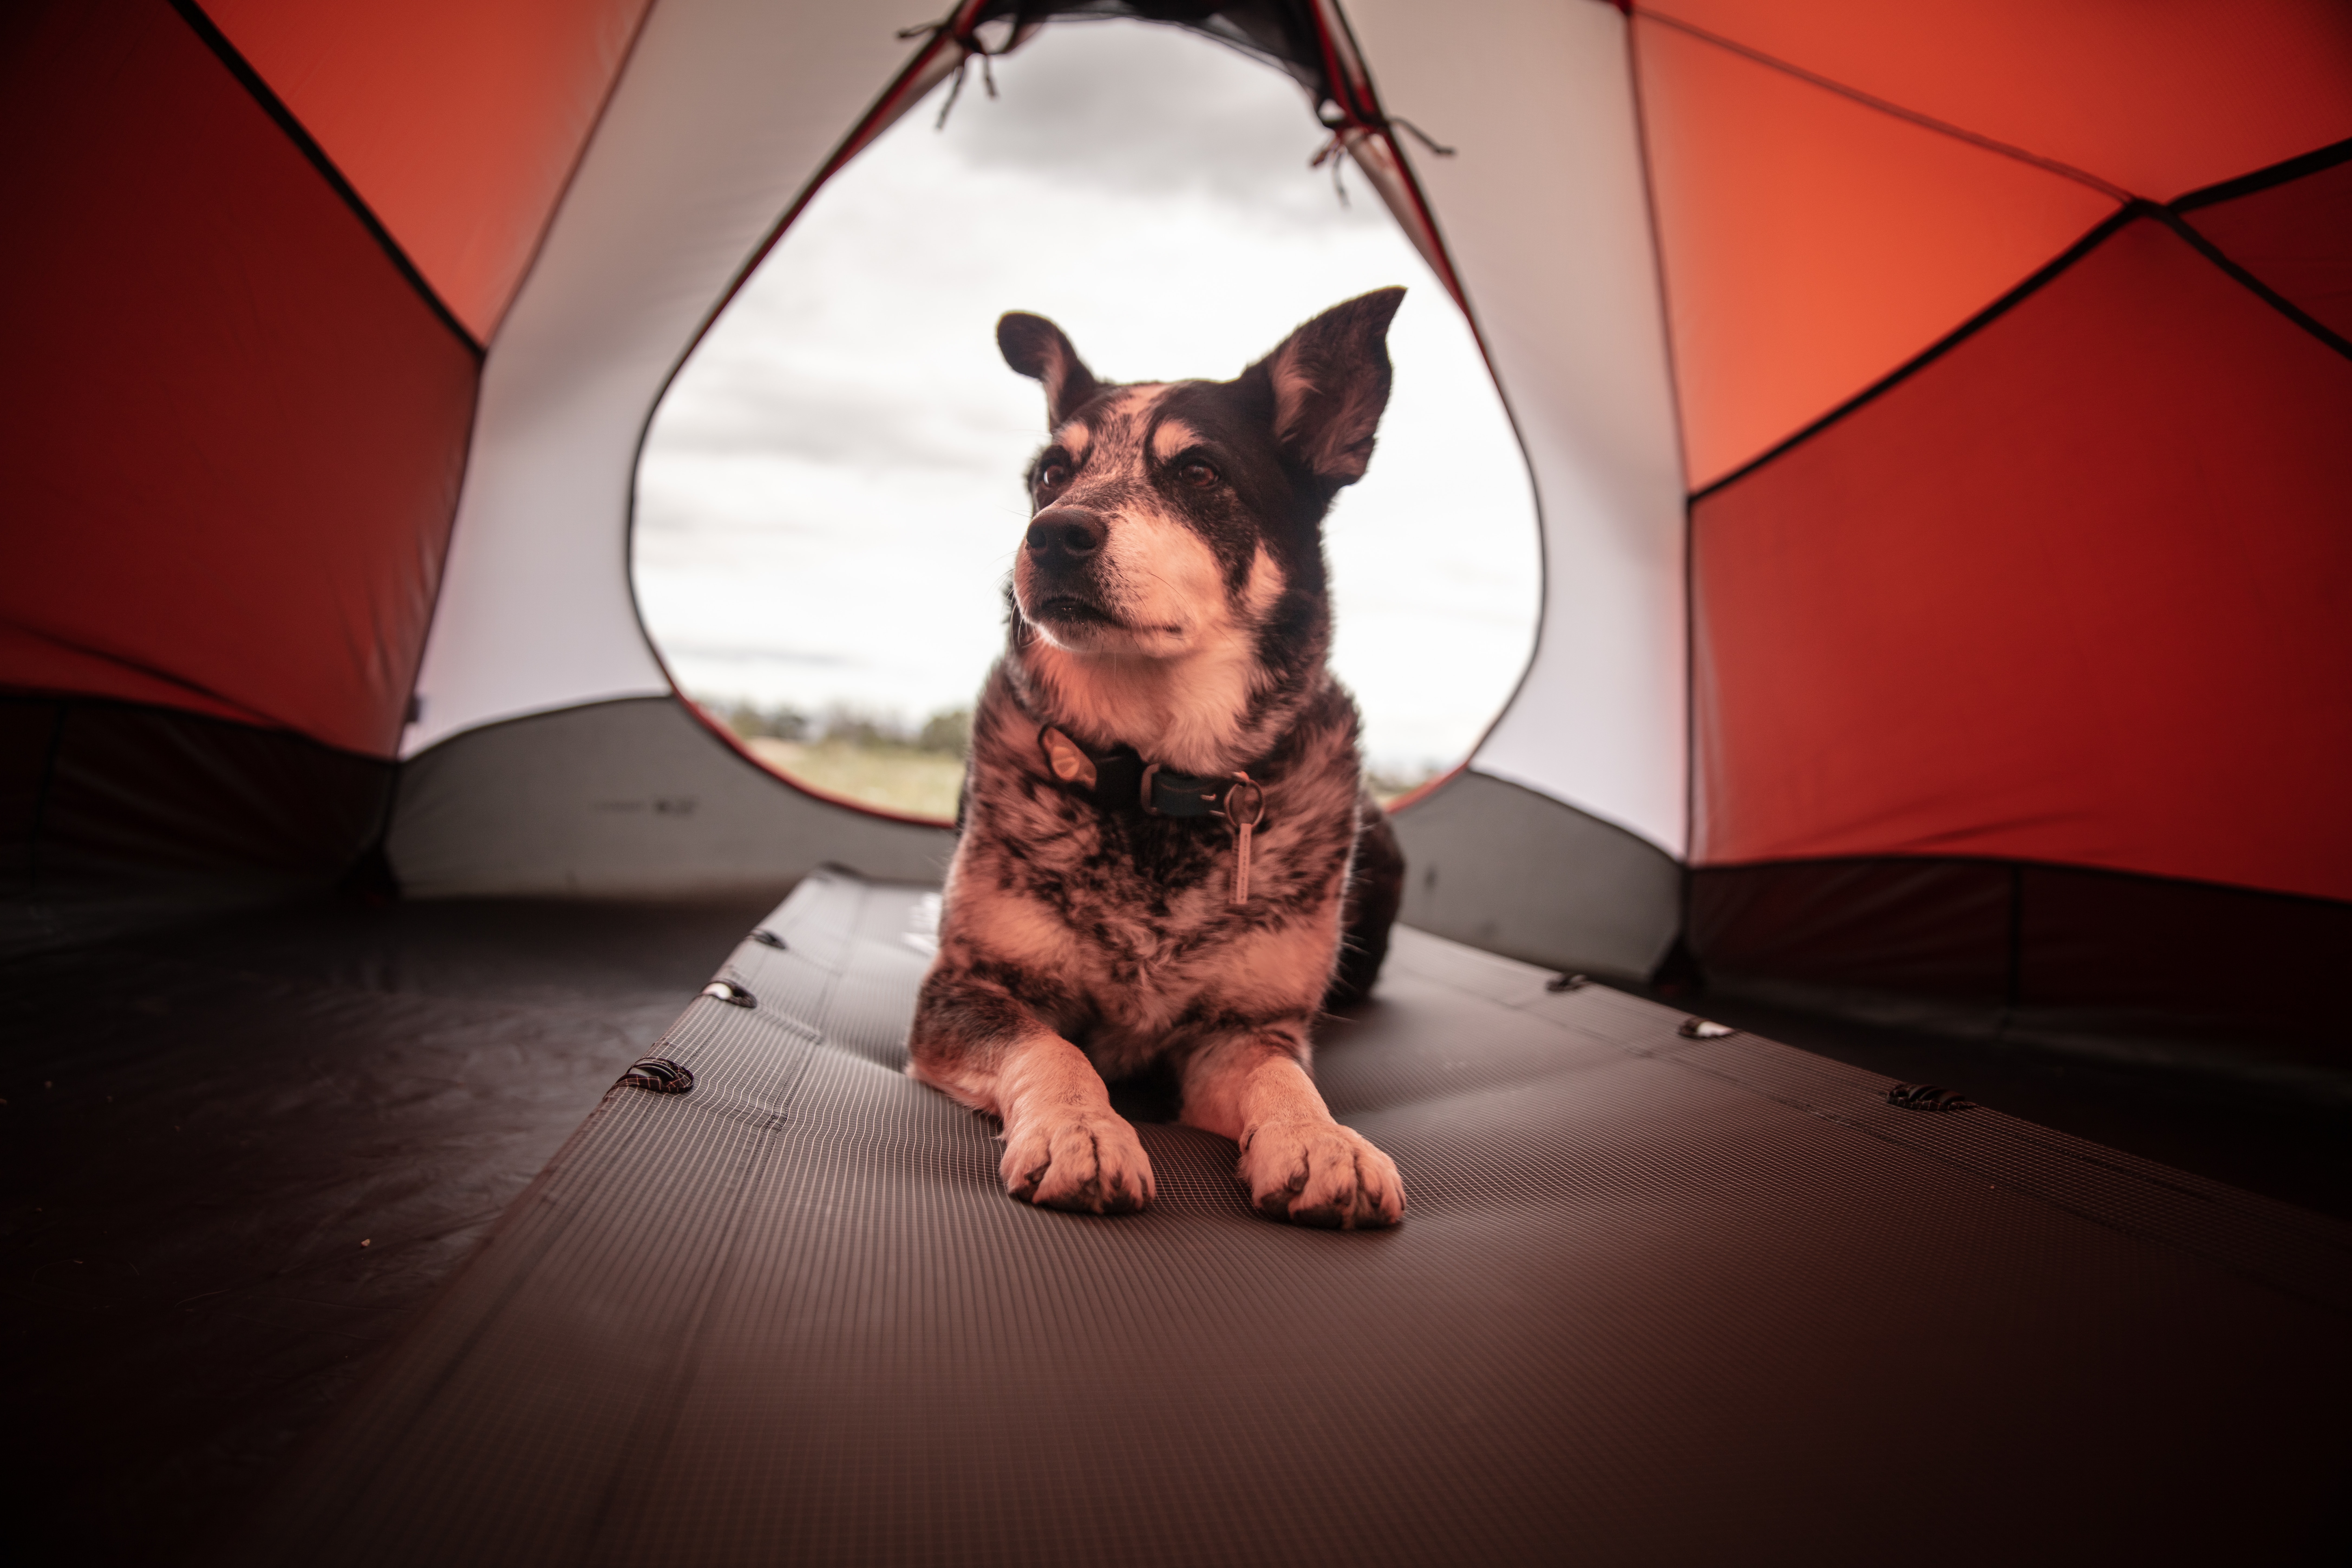 Camping Tips for Pet Owners